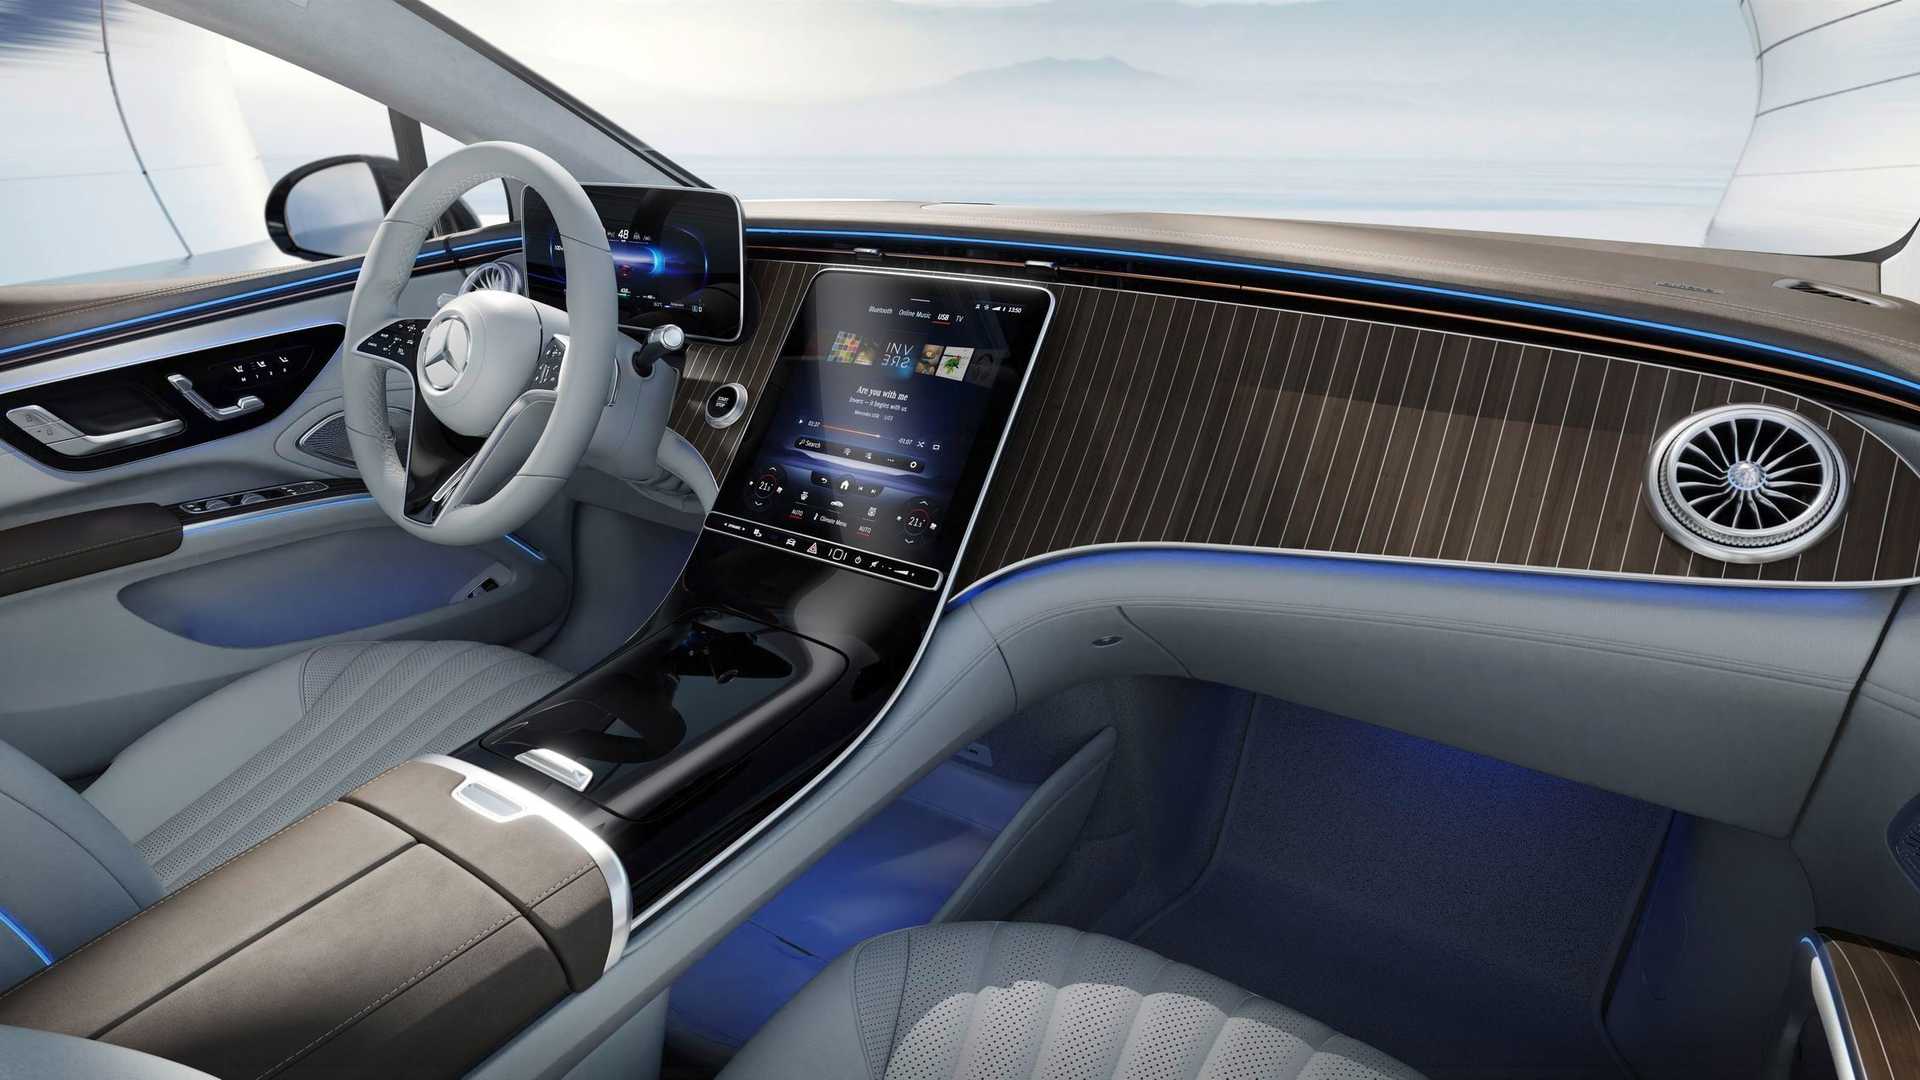 The Luxurious Interior of the MercedesBenz AllElectric EQS Revealed